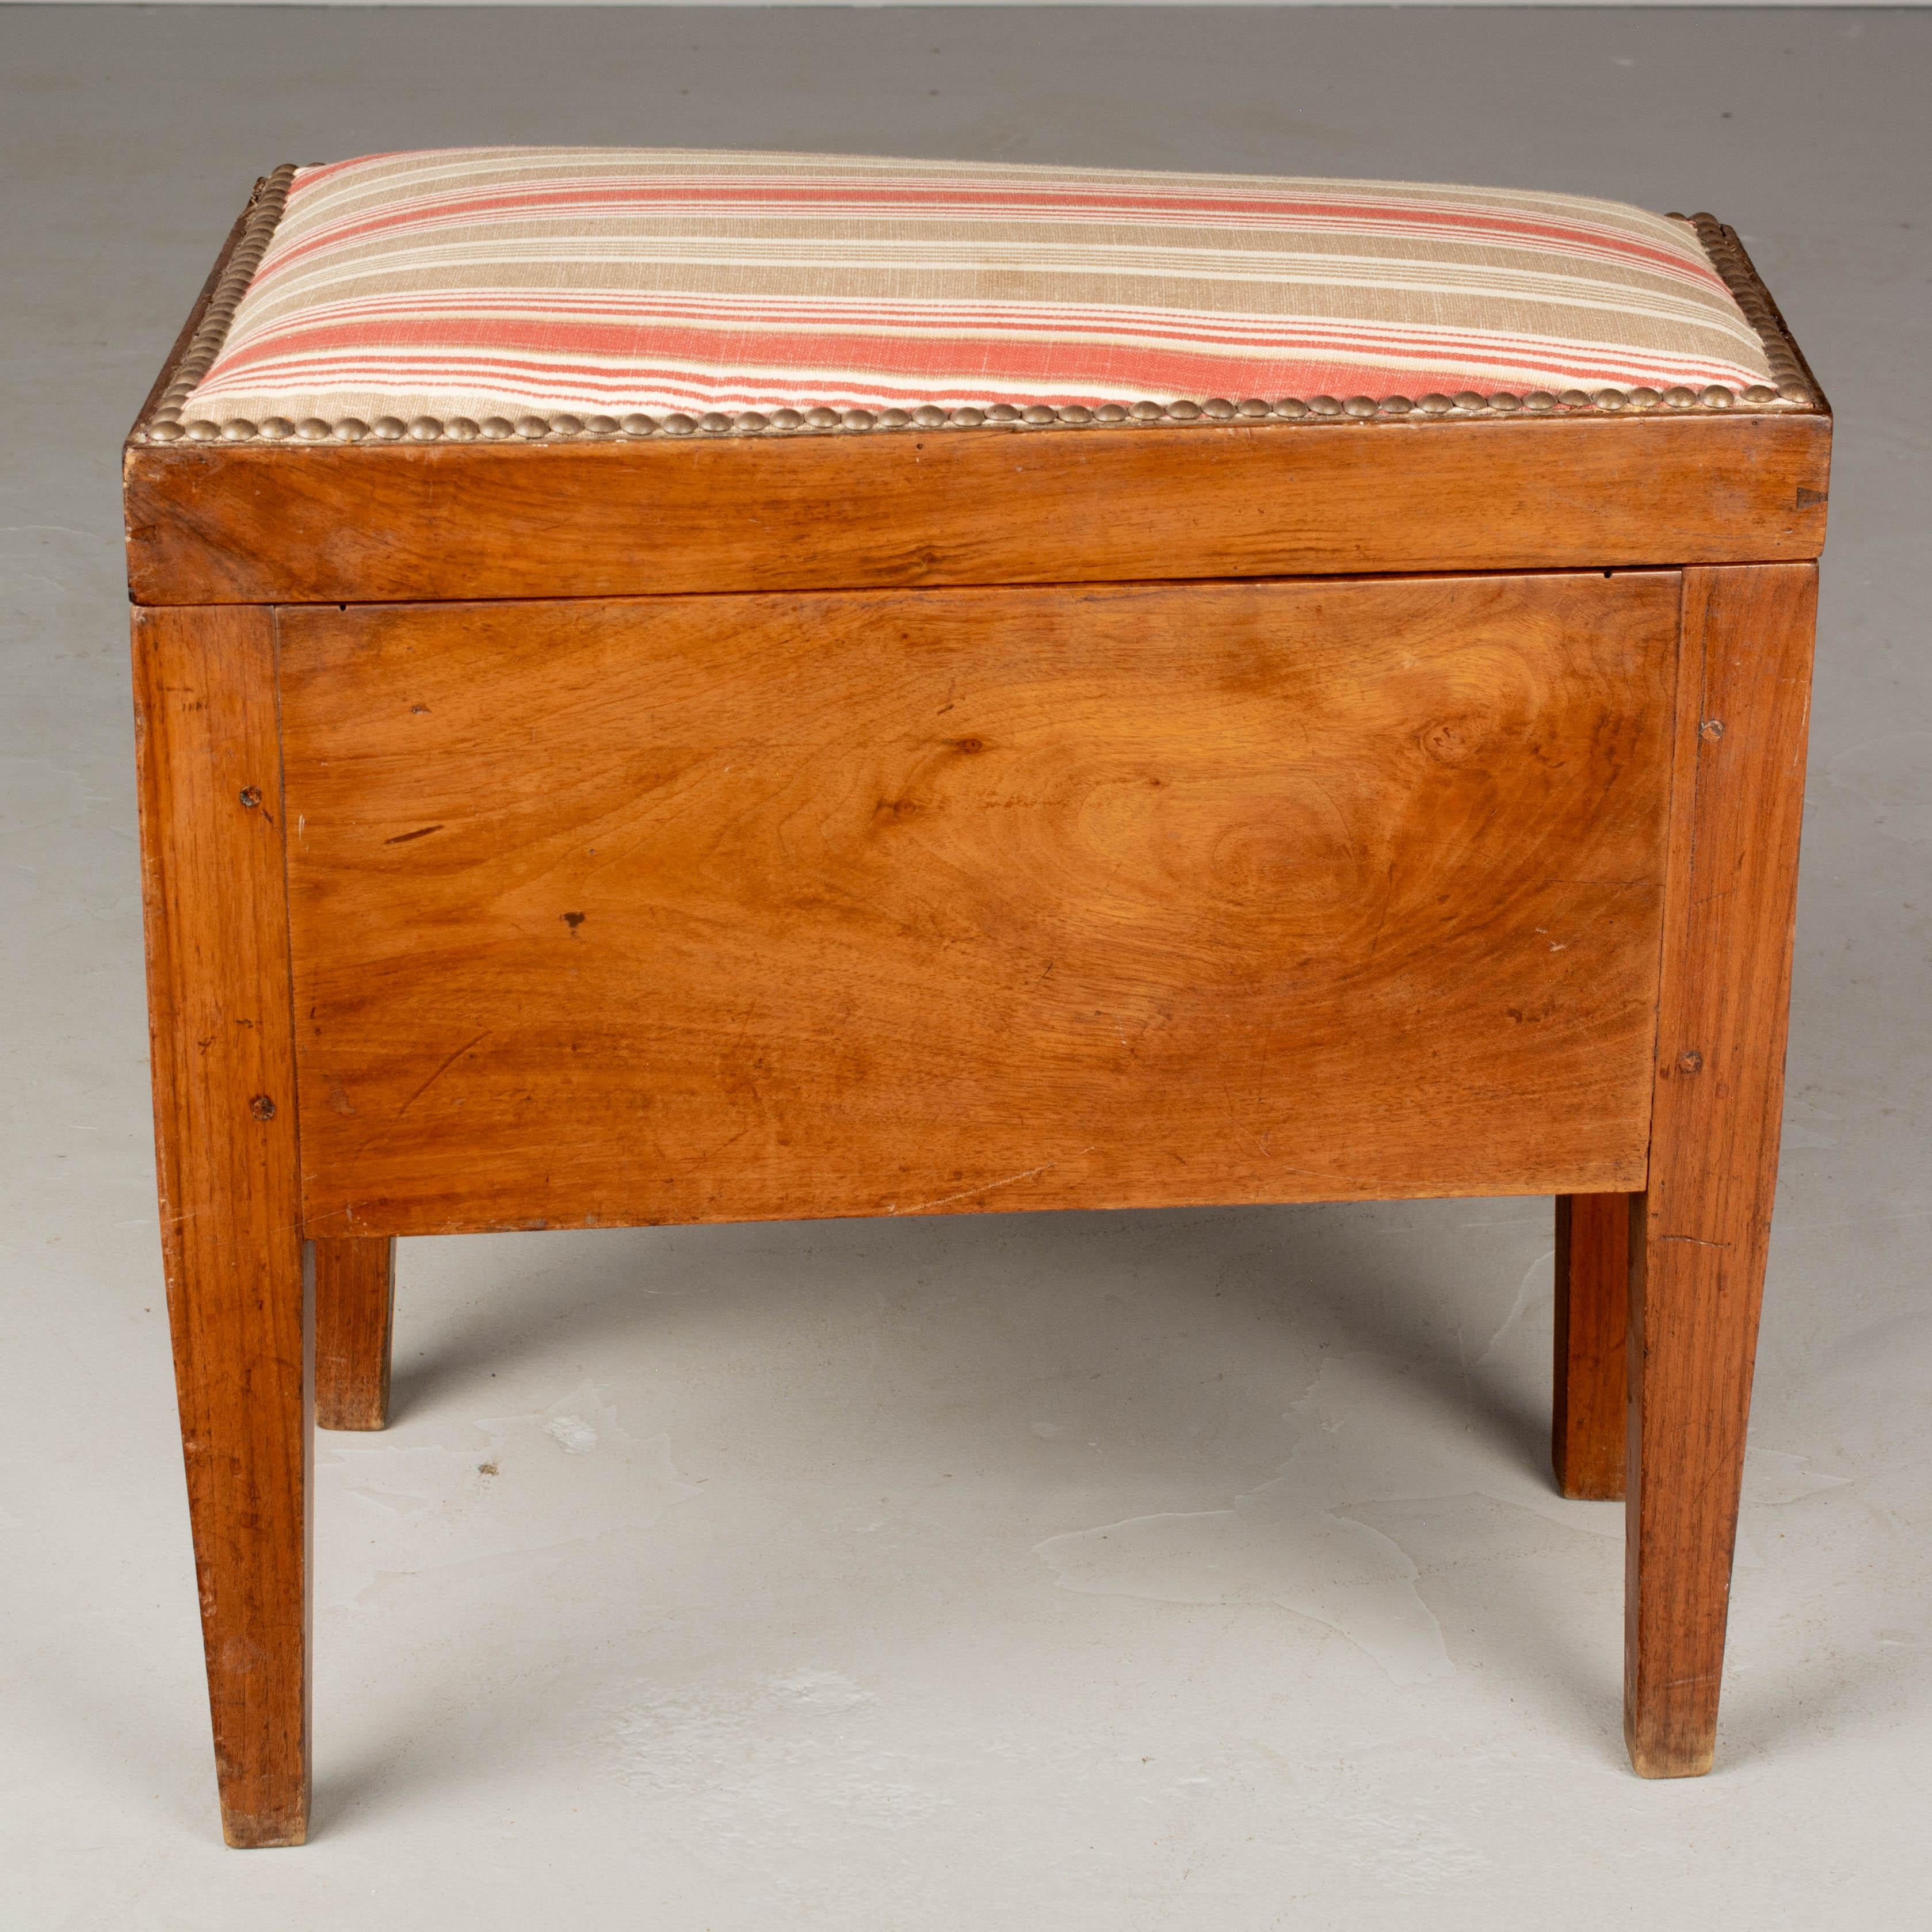 Hand-Crafted 19th Century French Shoe Shine Stool For Sale